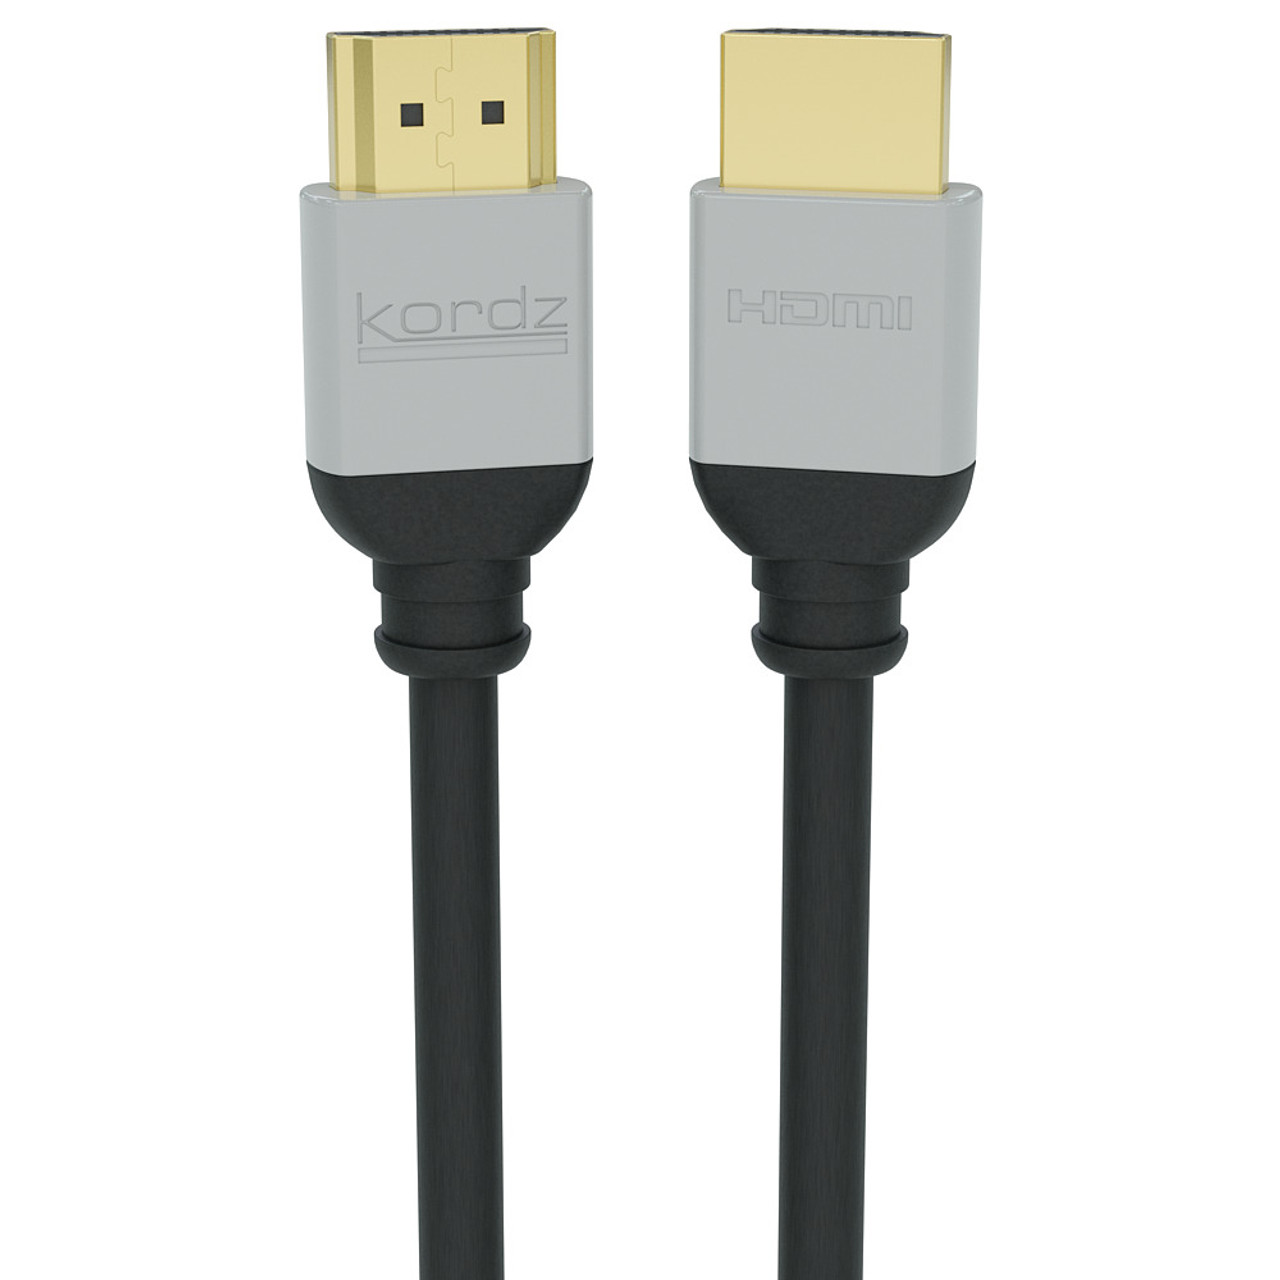 Kordz Pro3 Series 4K60 HDR 18Gbps HDMI 2.0 Cables (0.5 - 5m)